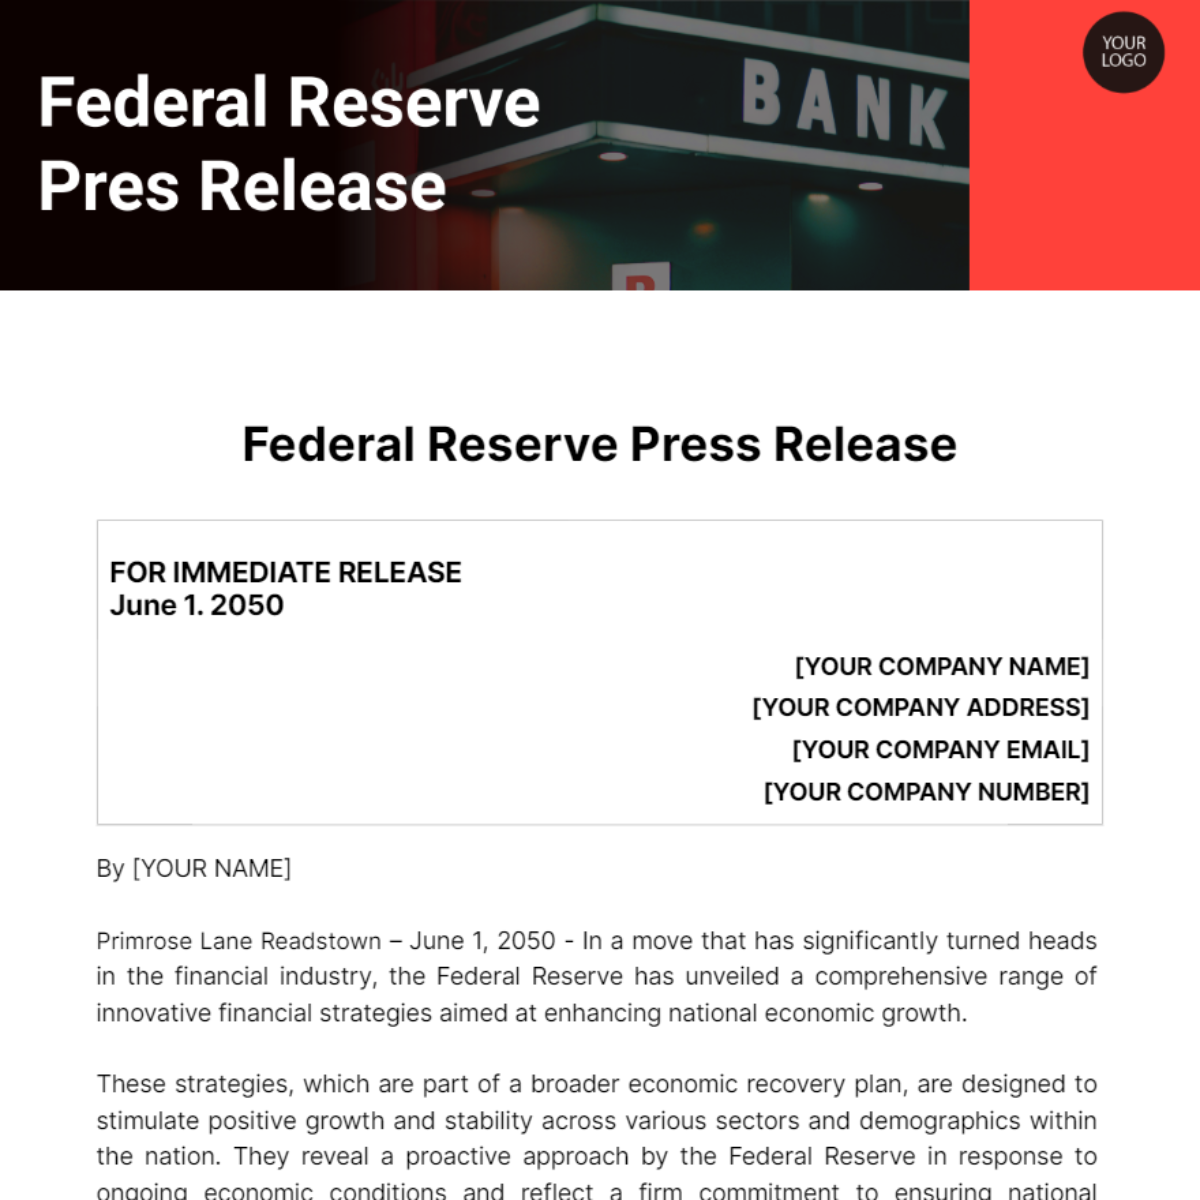 Federal Reserve Press Release Template